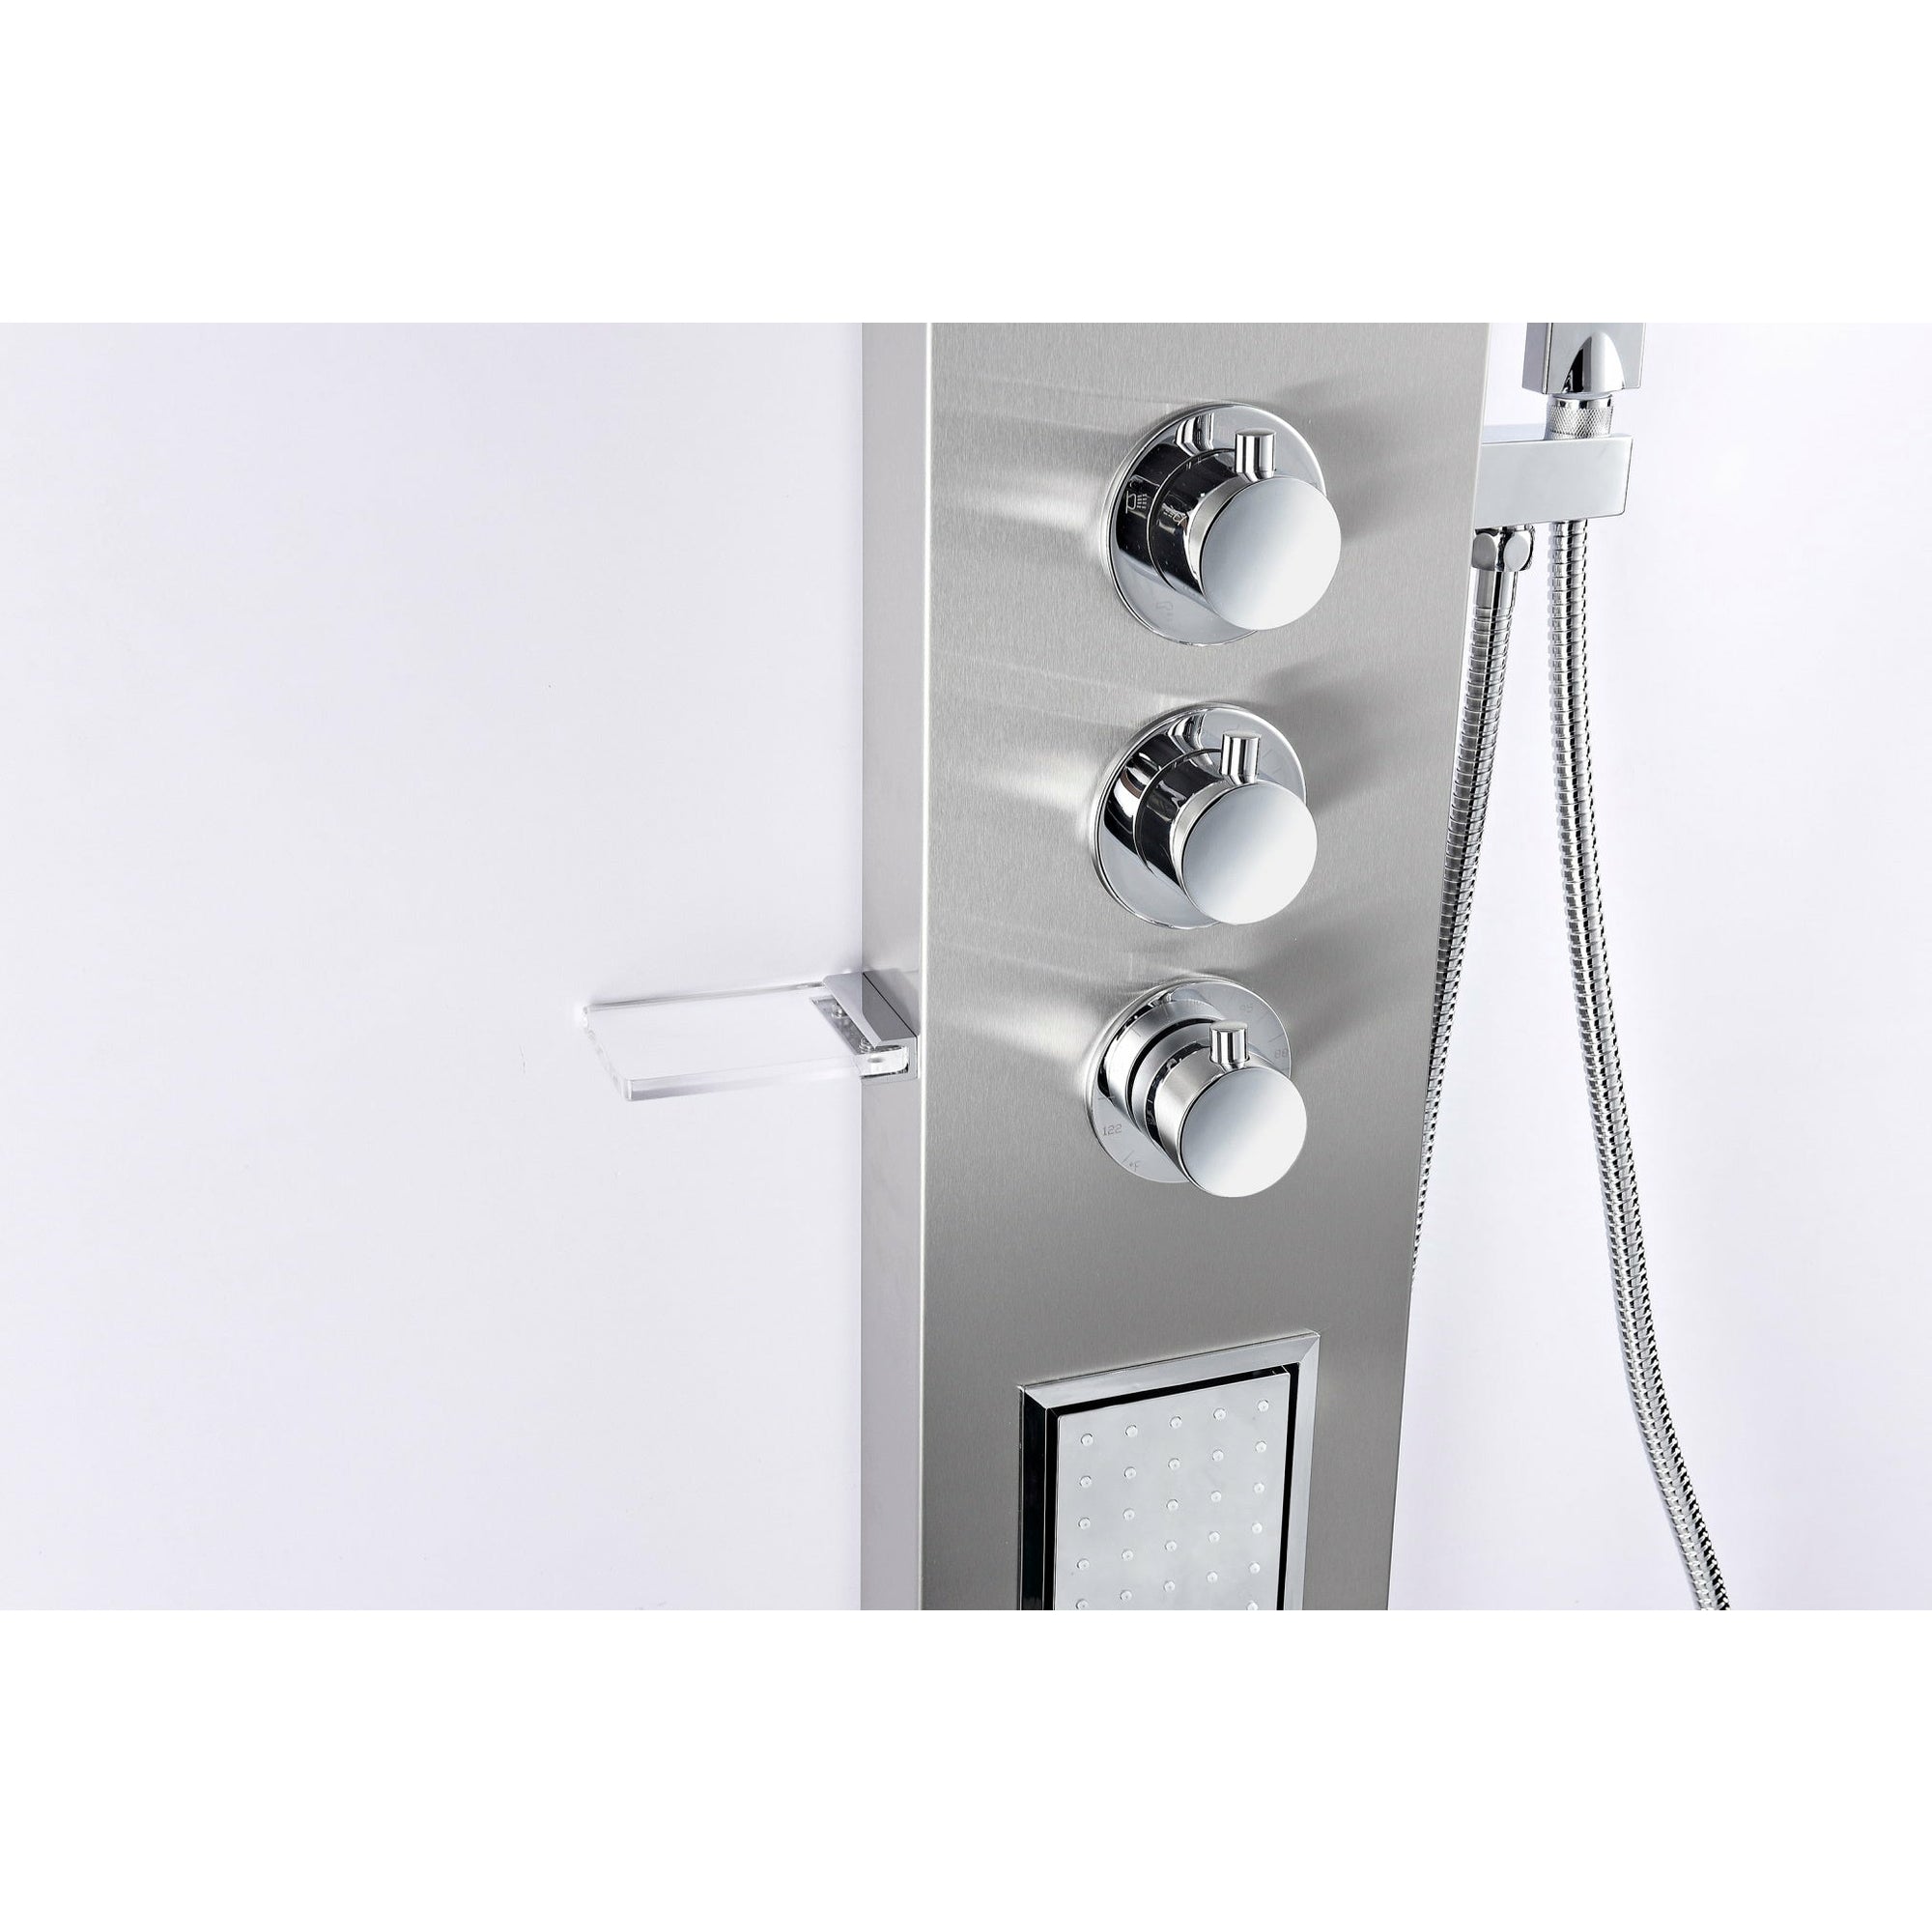 Anzzi Mesmer 58 Inch Full Body Shower Panel with Dual Level Deco-Glass Shampoo Shelfs, Heavy Rain Shower Head With Cascading Waterfall, Acu-stream Directional Body Jets, Shower Control Knobs, Concentrated Water Spout and Euro-grip Handheld Sprayer in Brushed Steel SP-AZ8094 - Vital Hydrotherapy